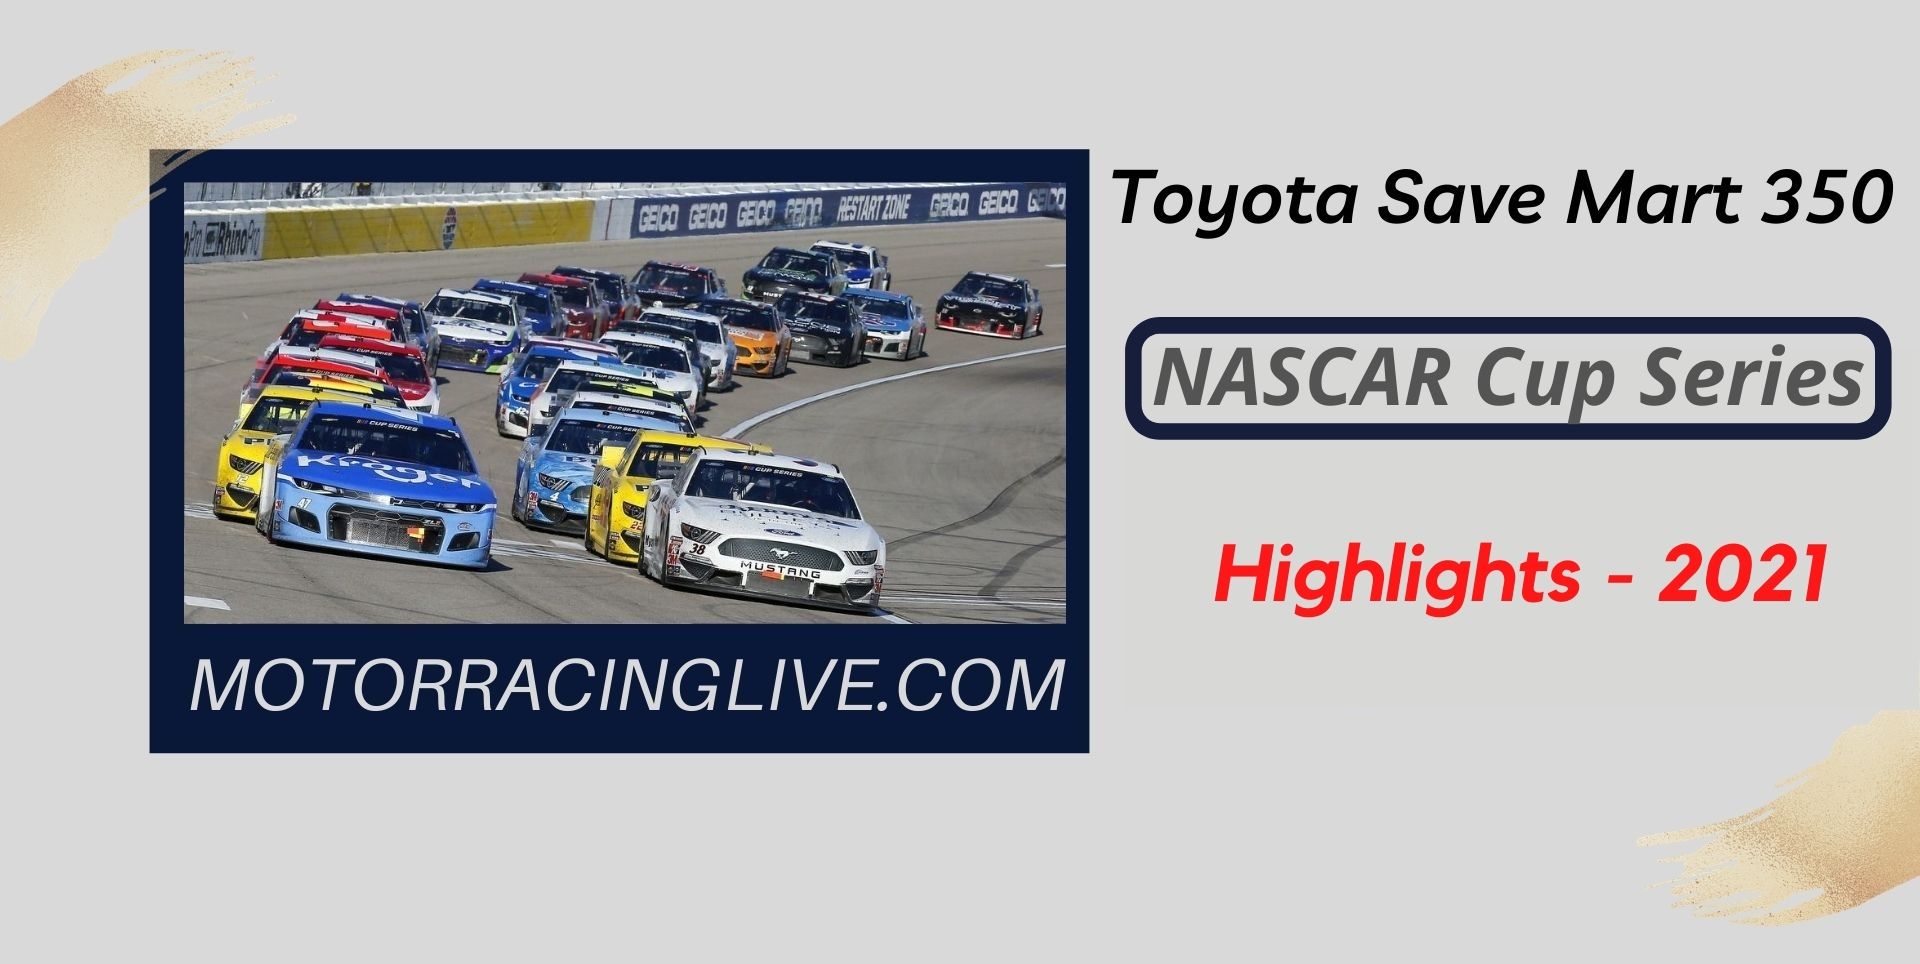 Toyota Save Mart 350 Highlights 2021 NASCAR Cup Series